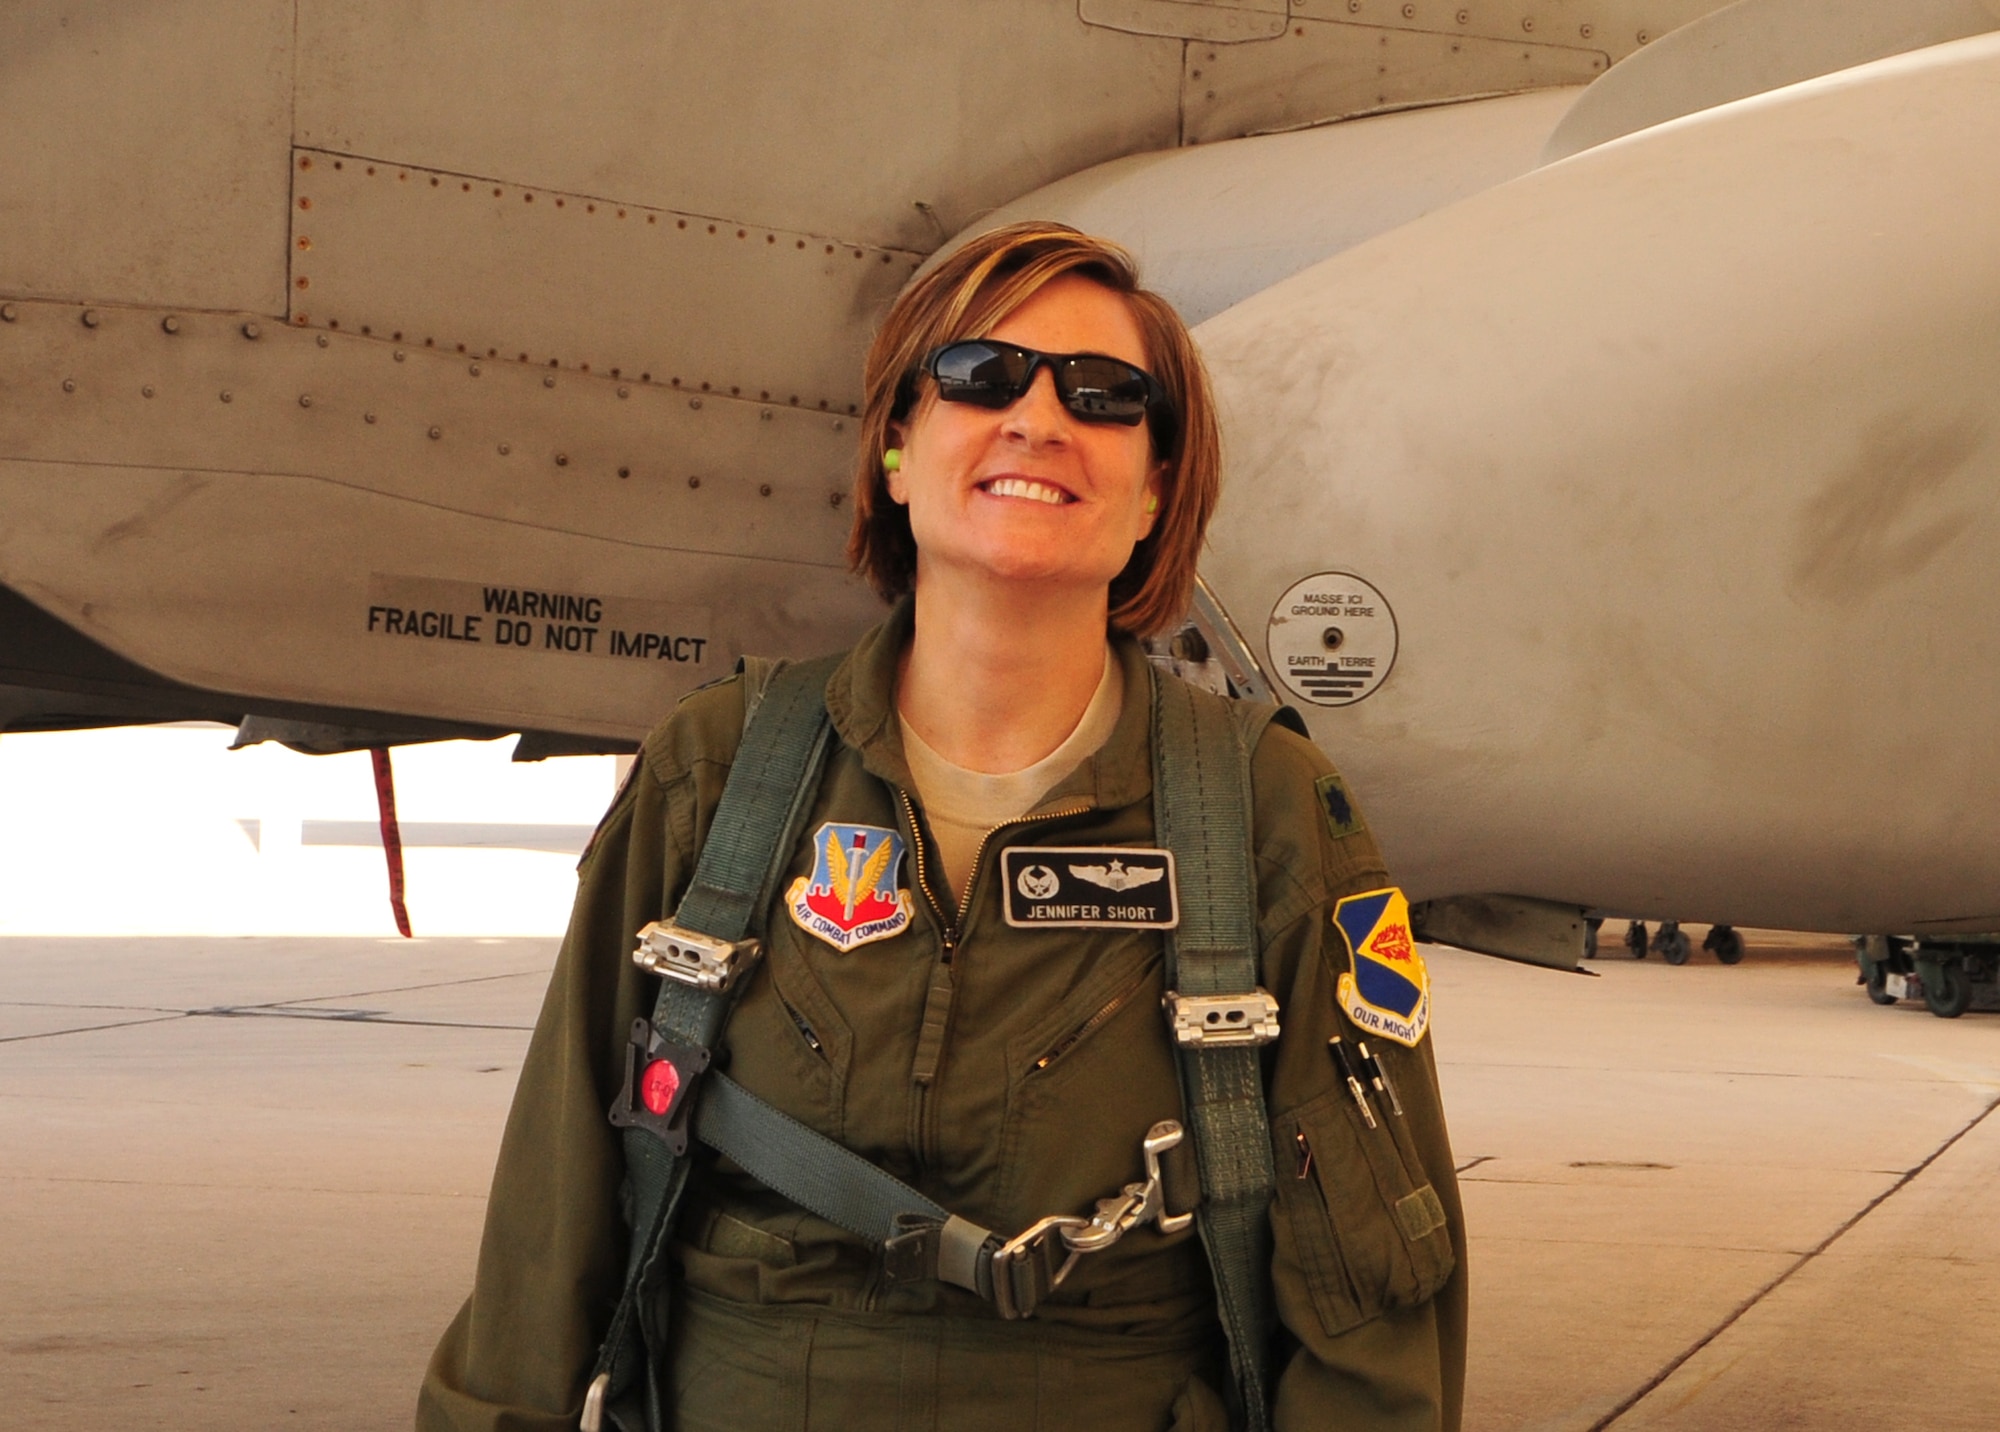 U.S. Air Force Lt. Co.l Jennifer Short, 358th Fighter Squadron commander, prepares for a flight on an A-10 Thunderbolt II at Davis-Monthan Air Force Base, Ariz., March 27, 2013. Lt. Col Short is preparing for a training flight as an instructor pilot. (U.S. Air Force photo by Senior Airman Camilla Griffin/Released)